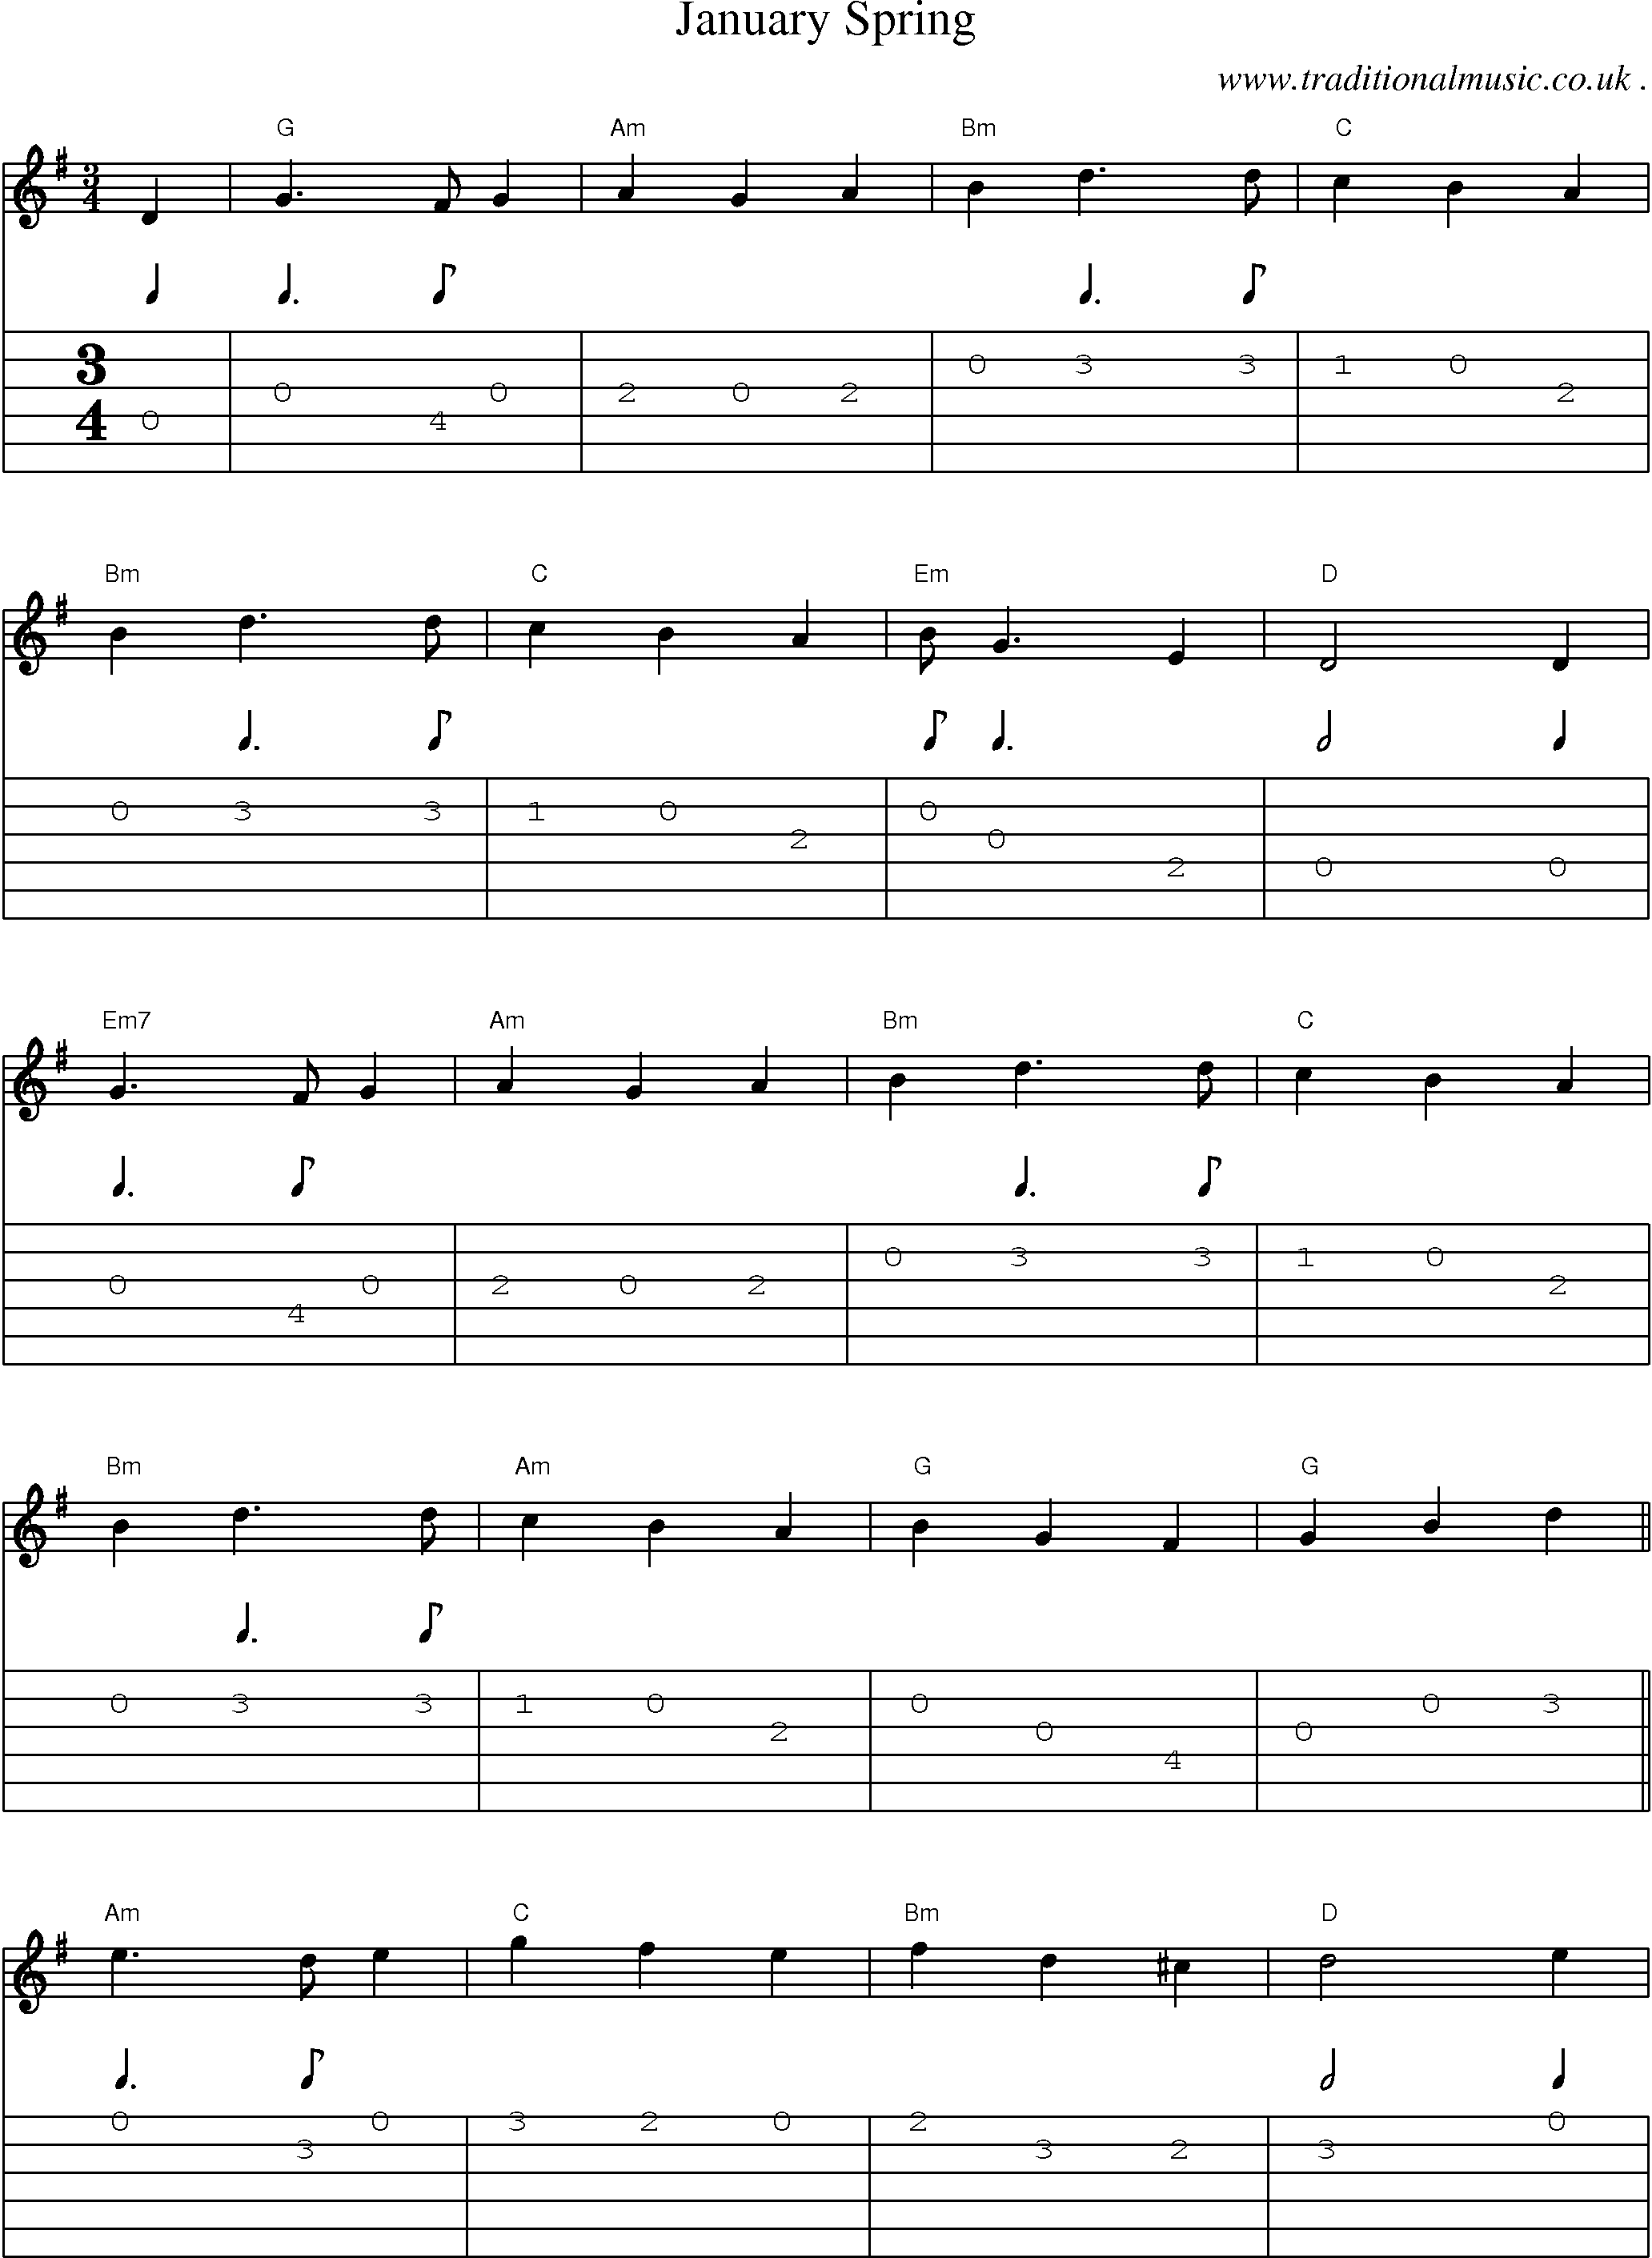 Music Score and Guitar Tabs for January Spring